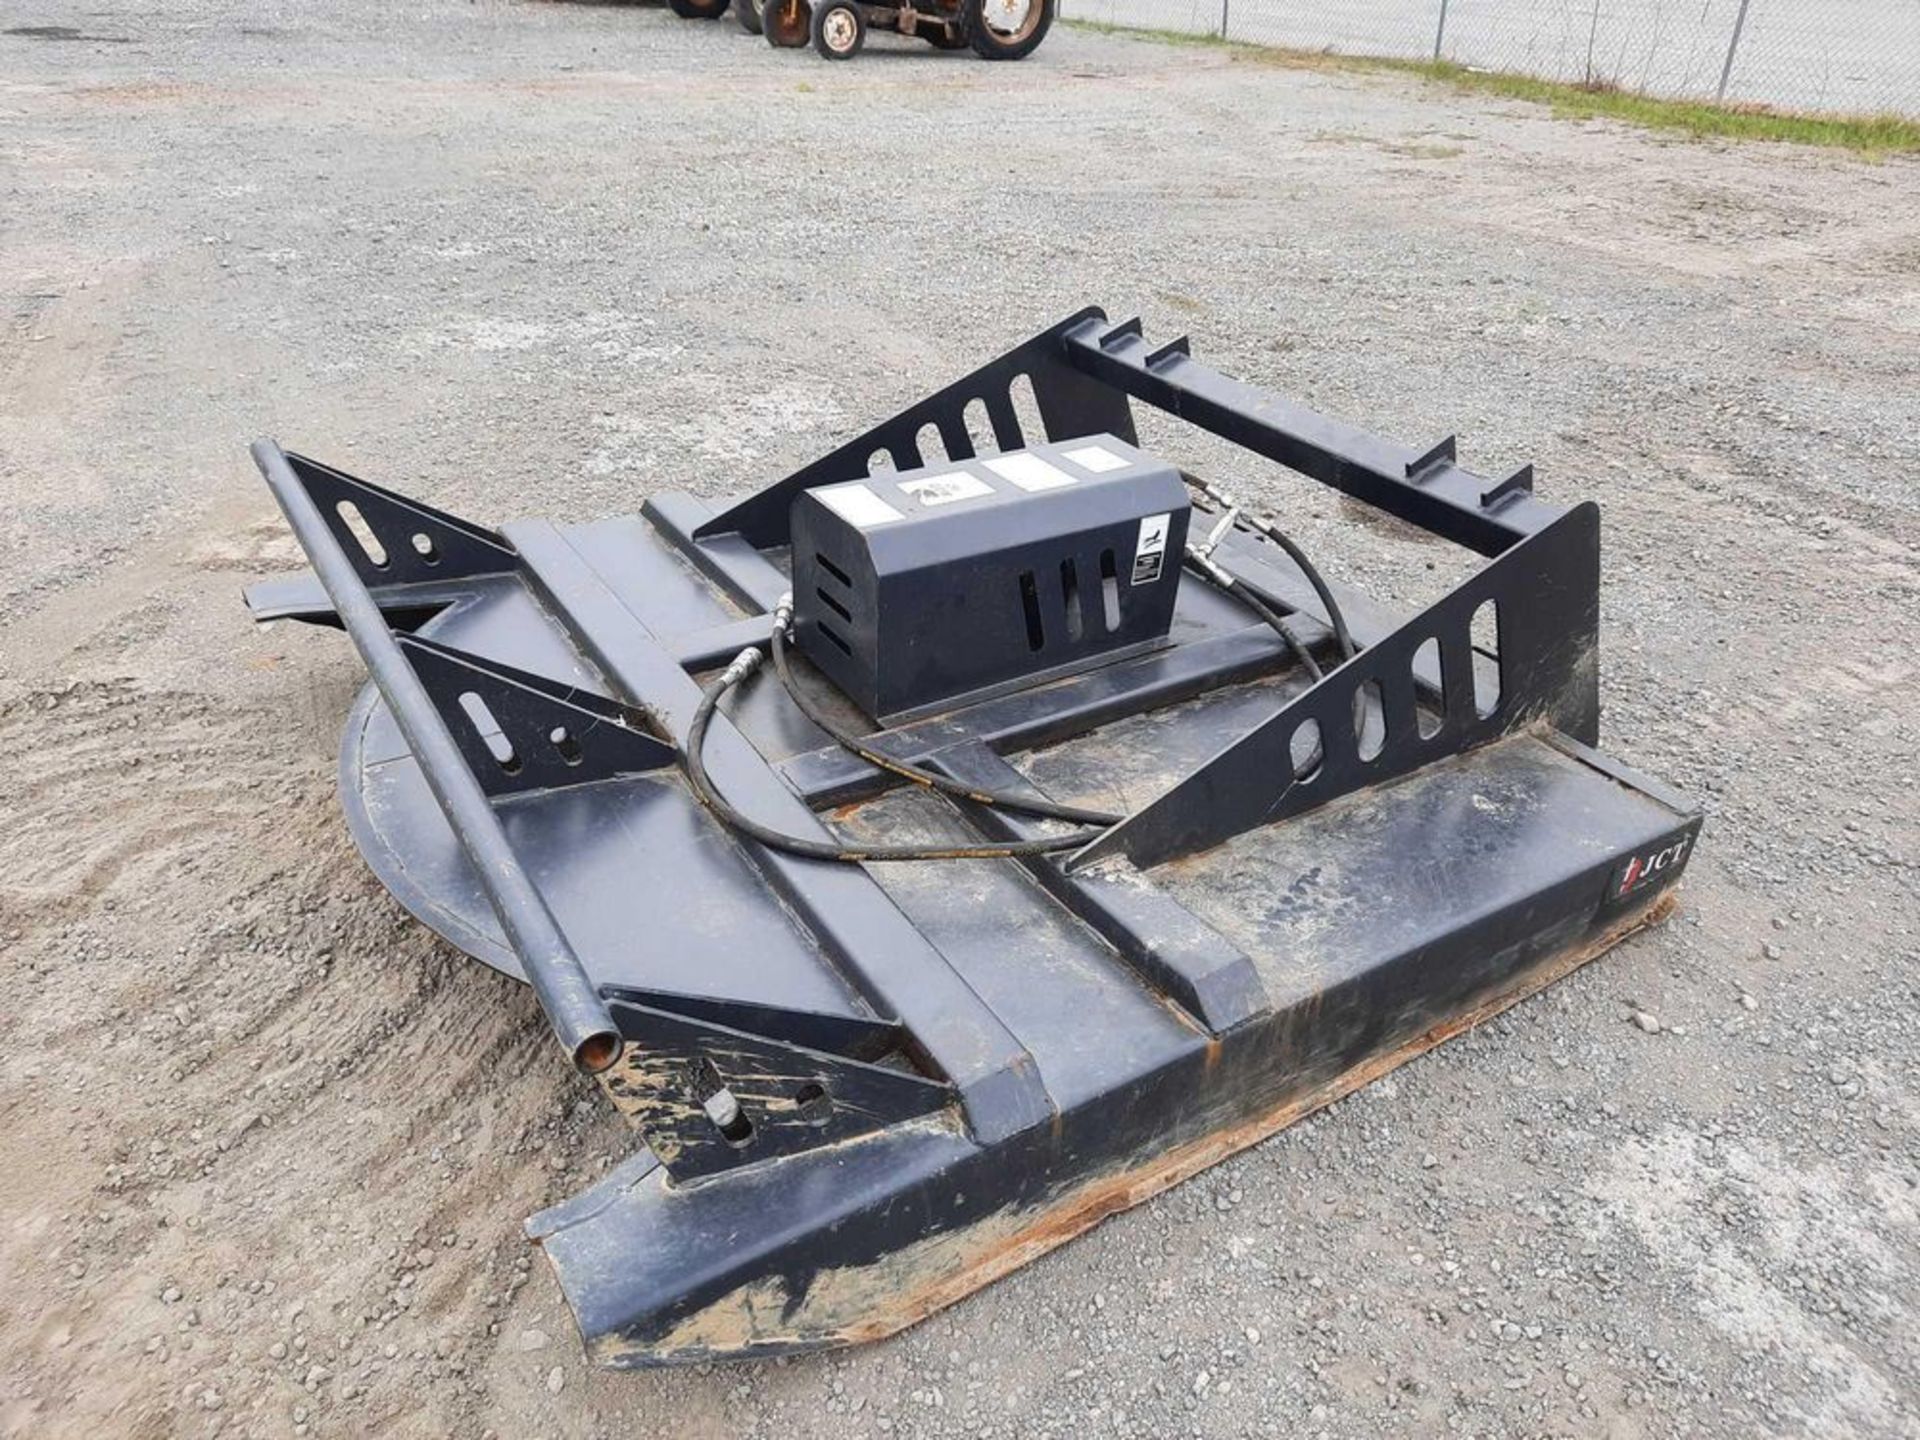 72" JCT HYDRAULIC ROTARY CUTTER ATTACHMENT FOR SKID STEER